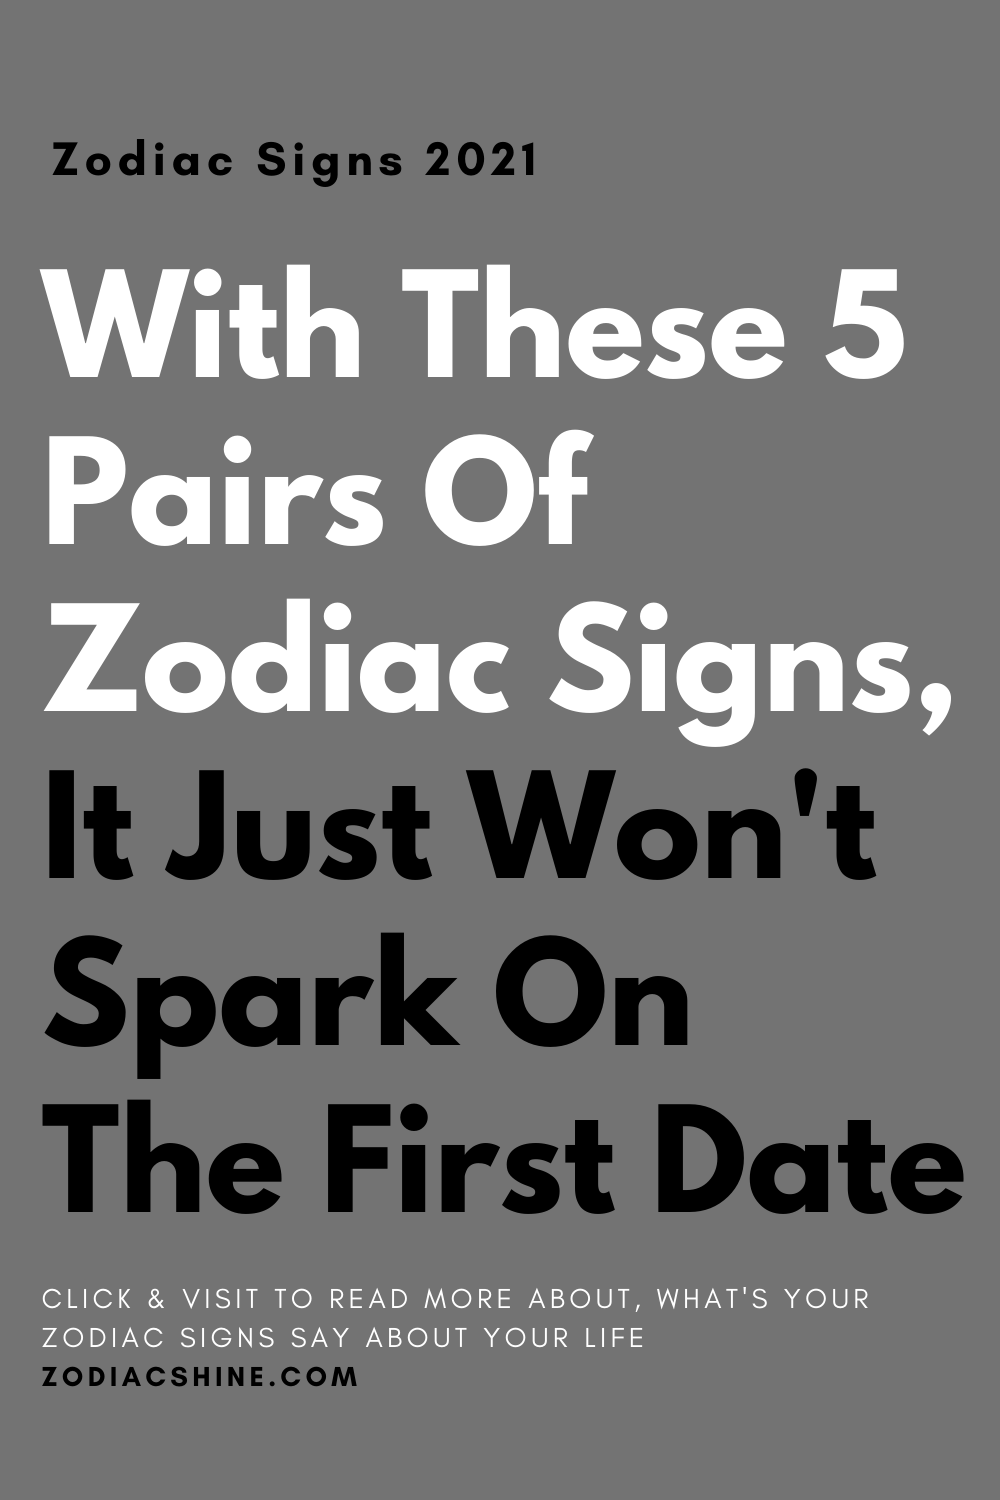 With These 5 Pairs Of Zodiac Signs, It Just Won't Spark On The First Date